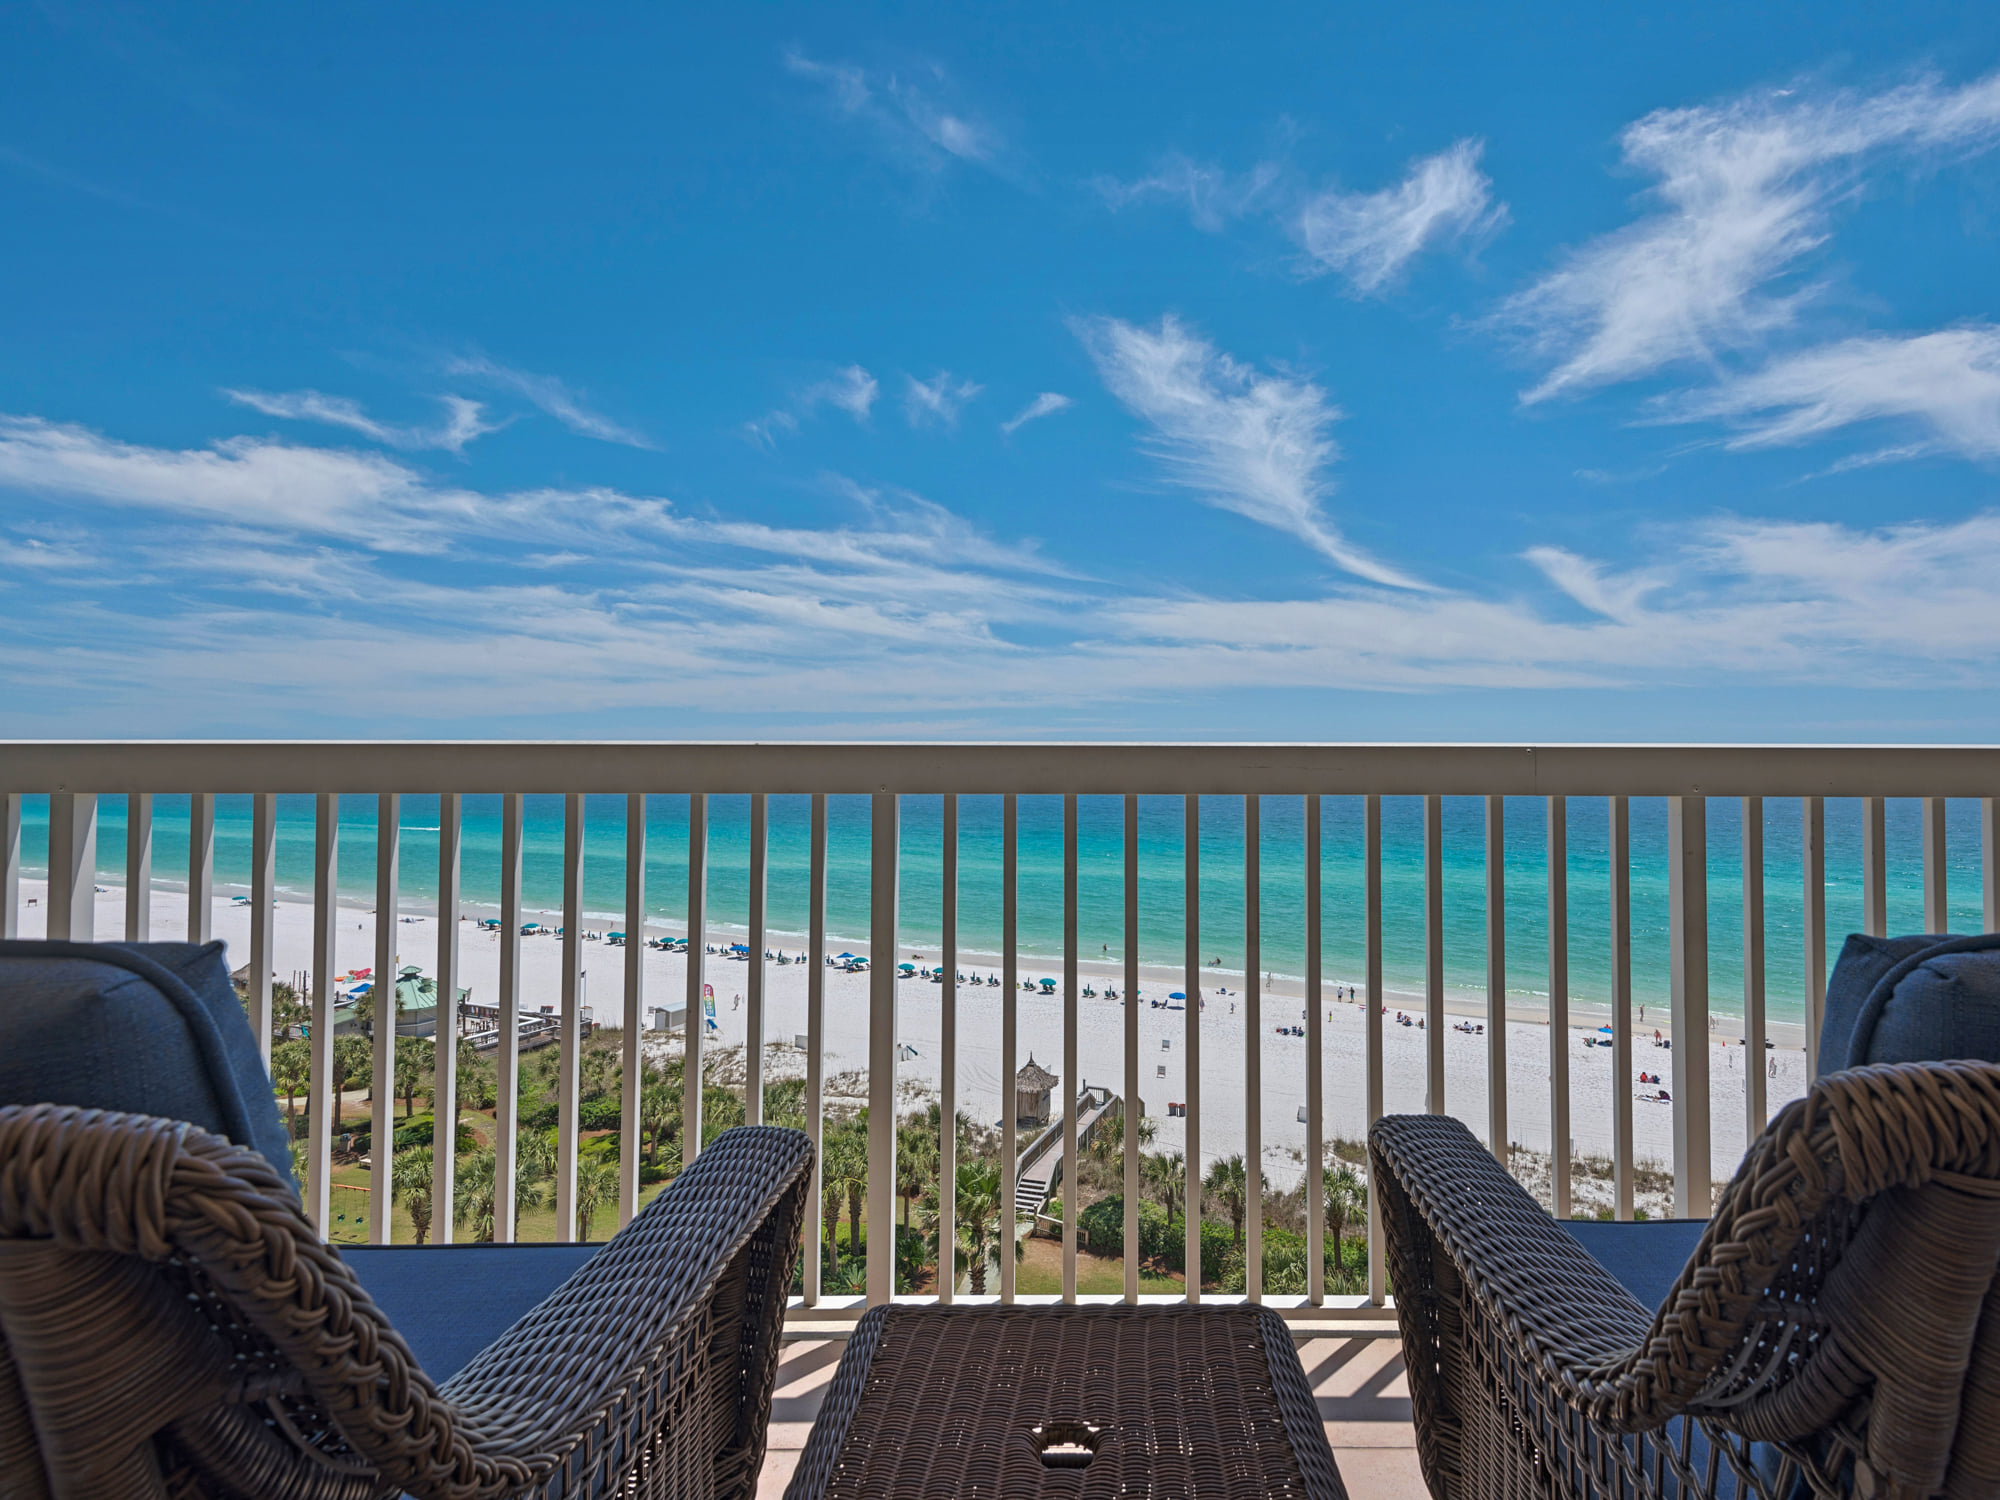 Couples will enjoy the view of Destin's white sand beaches, and feel good supporting local students when staying in a Newman-Dailey vacation rental for Valentine's Day.